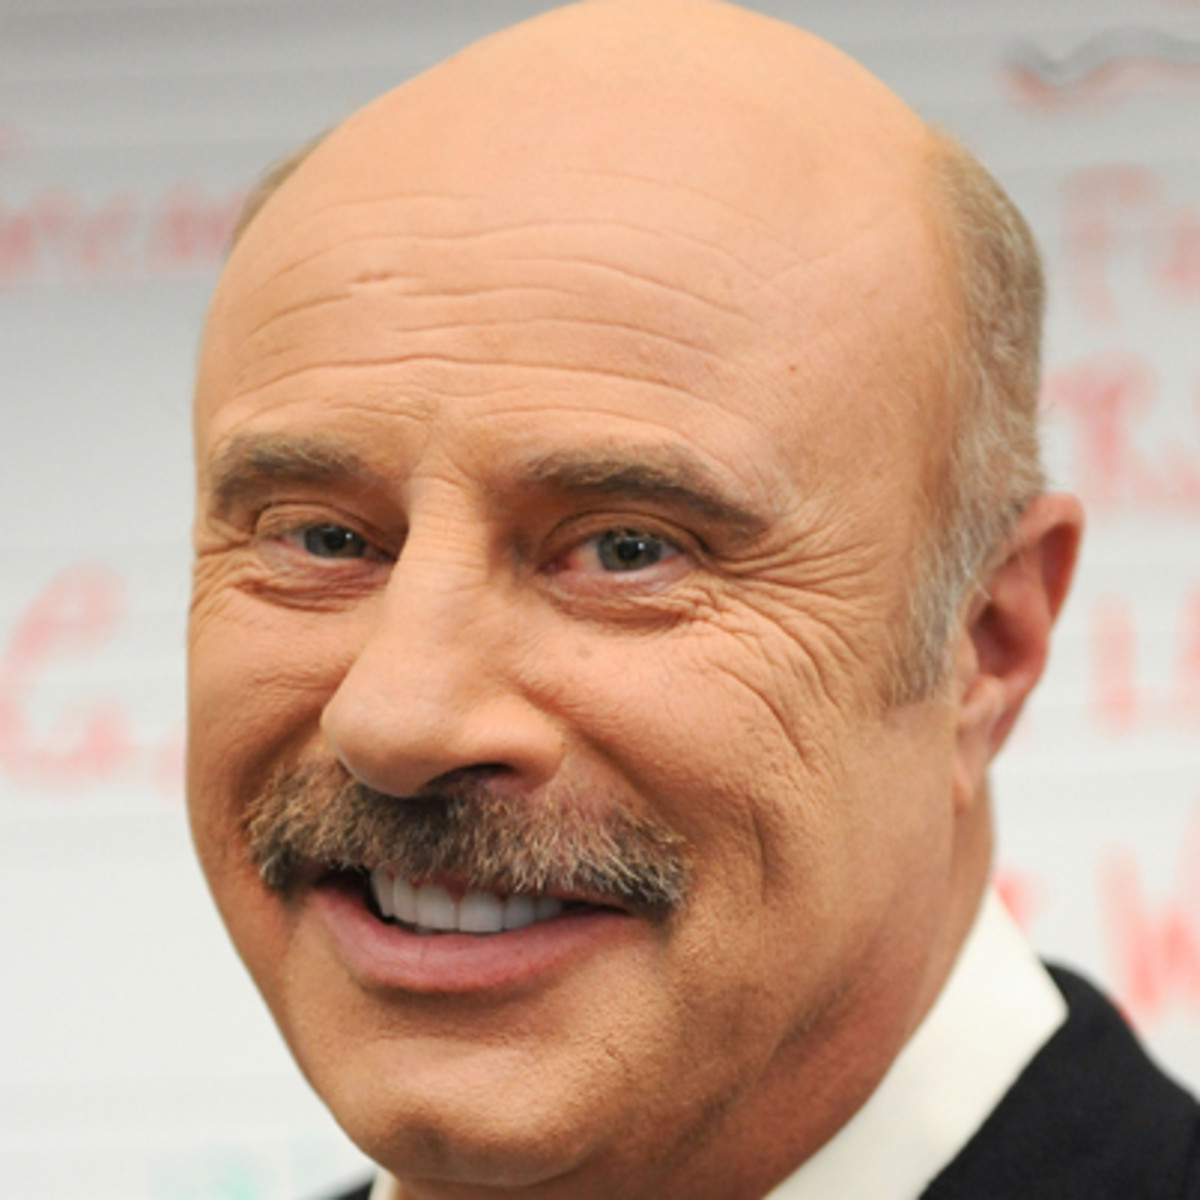 Dr Phil Wallpapers